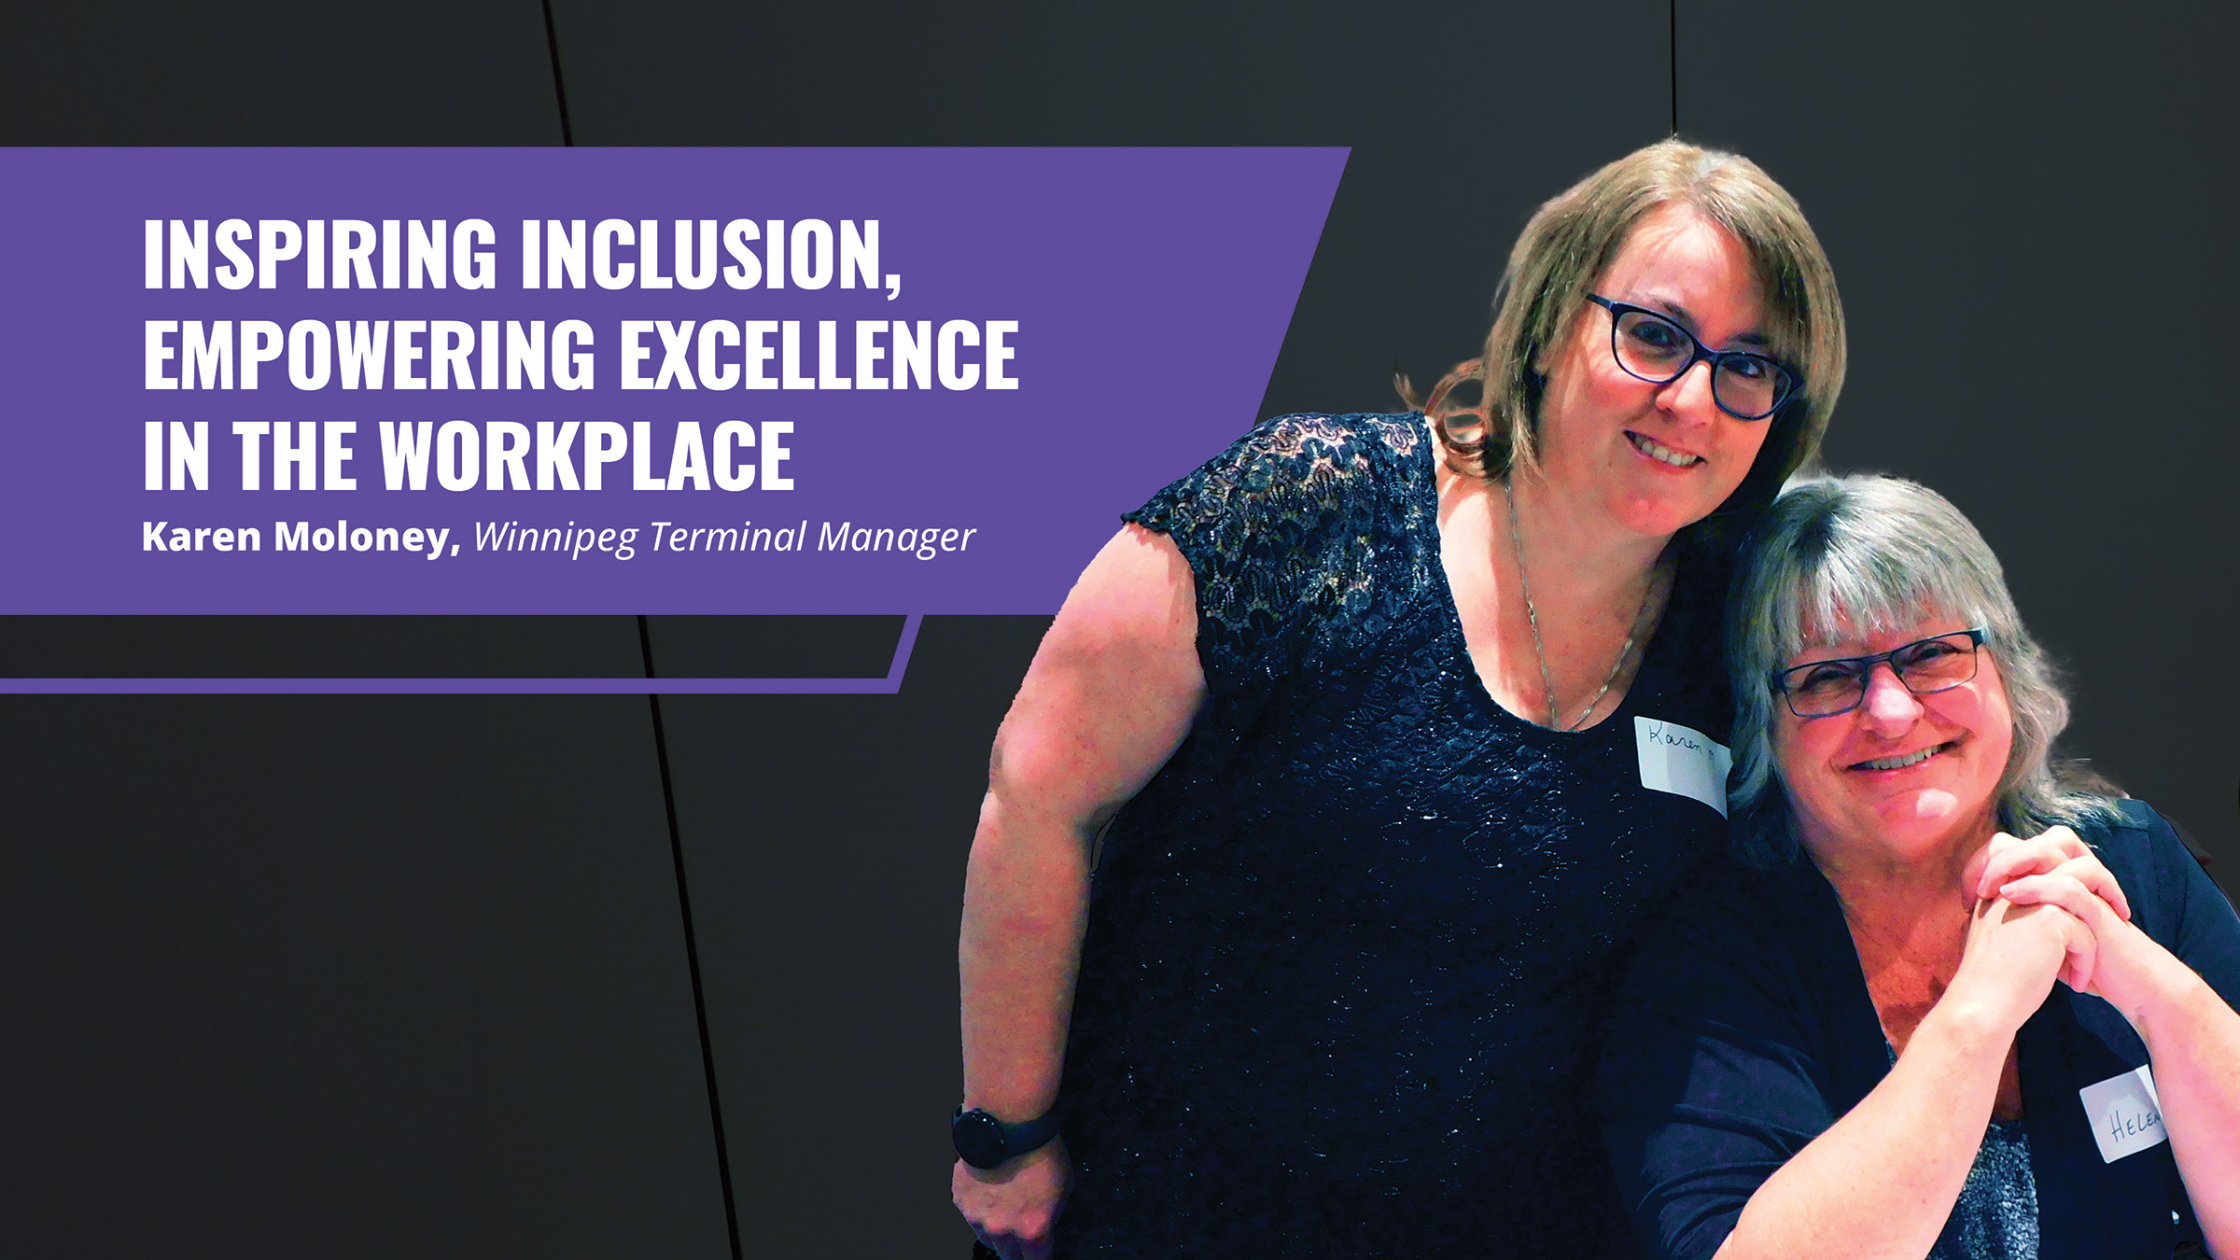 Inspiring Inclusion, Empowering Excellence in the Workplace